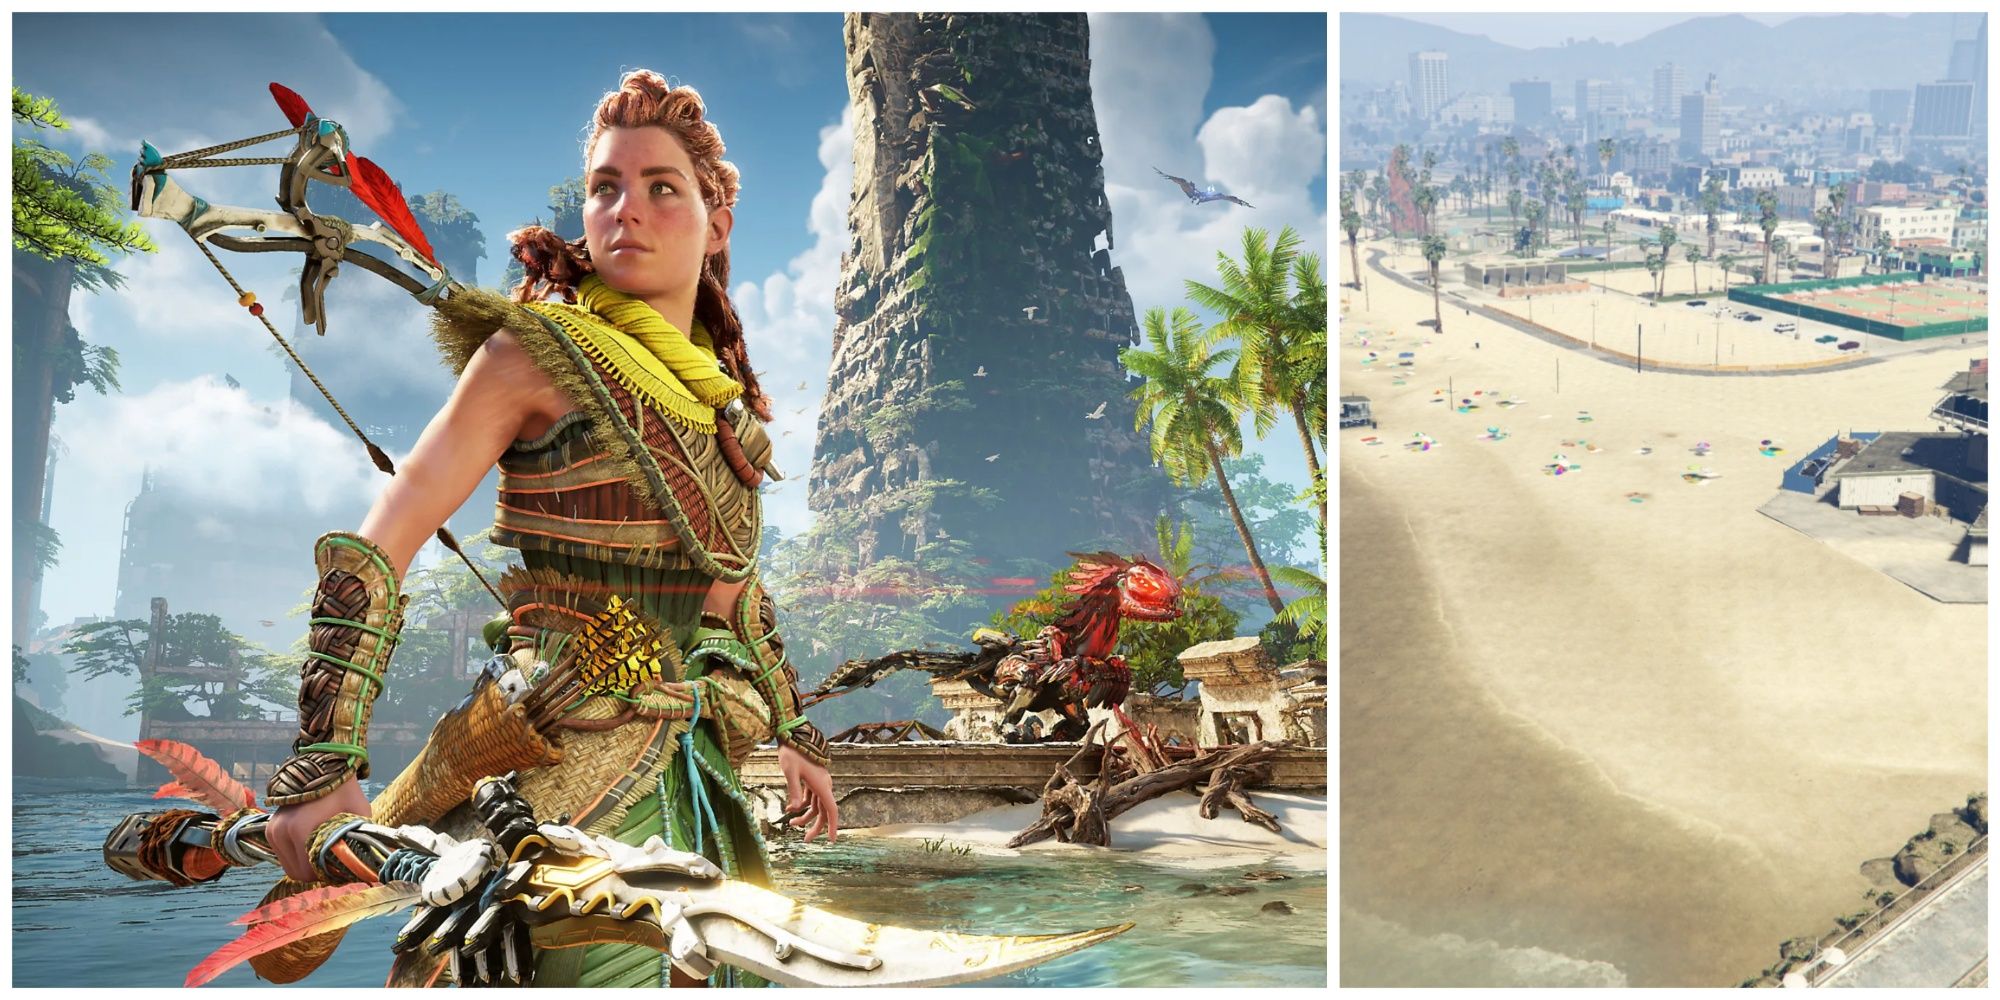 Collage featuring Aloy from Horizon Forbidden West and Vespucci Beach from GTA 5